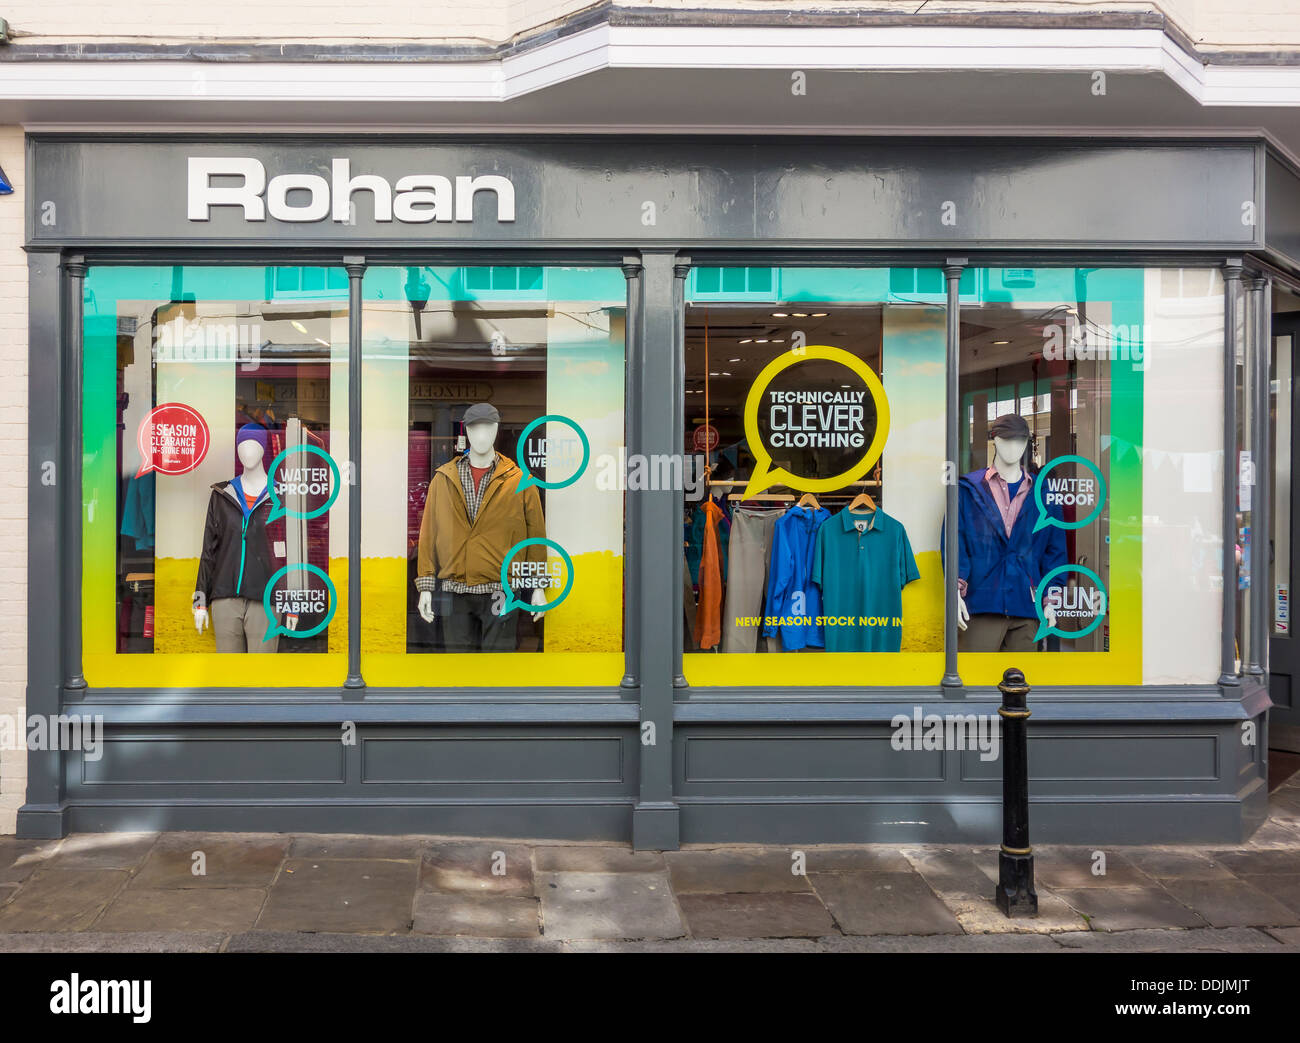 Rohan Outdoor Clothing Shop Store Stock Photo